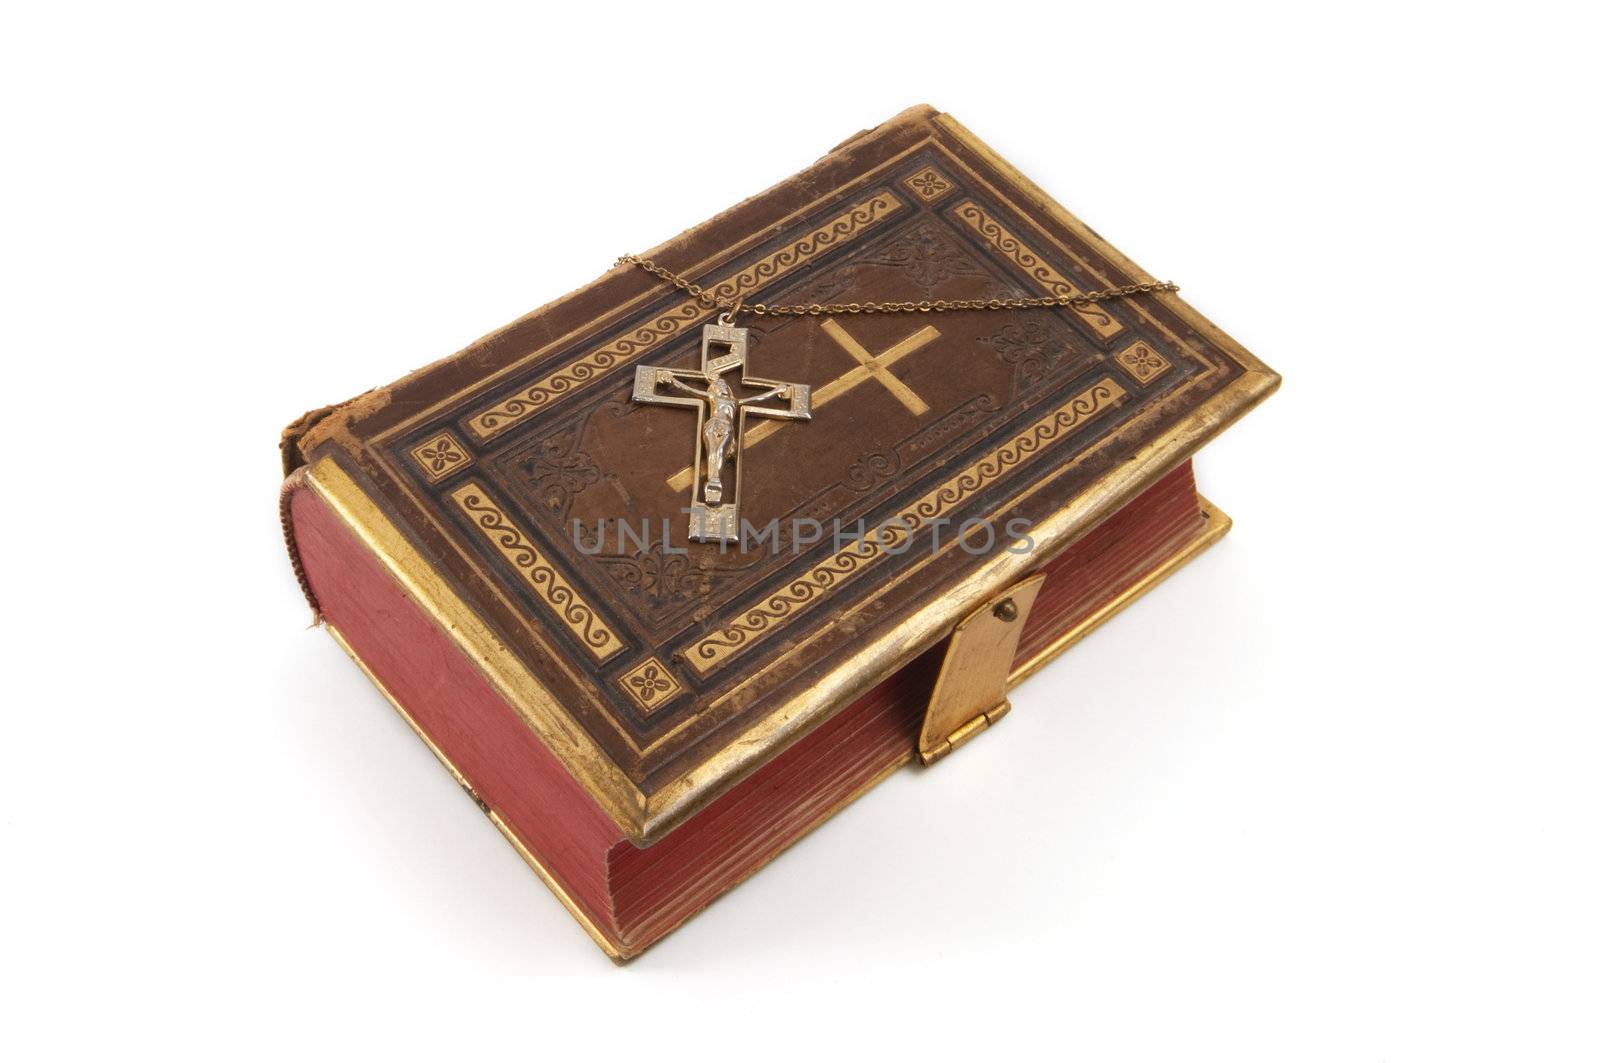 Cross on a religious book, isolated on a white background